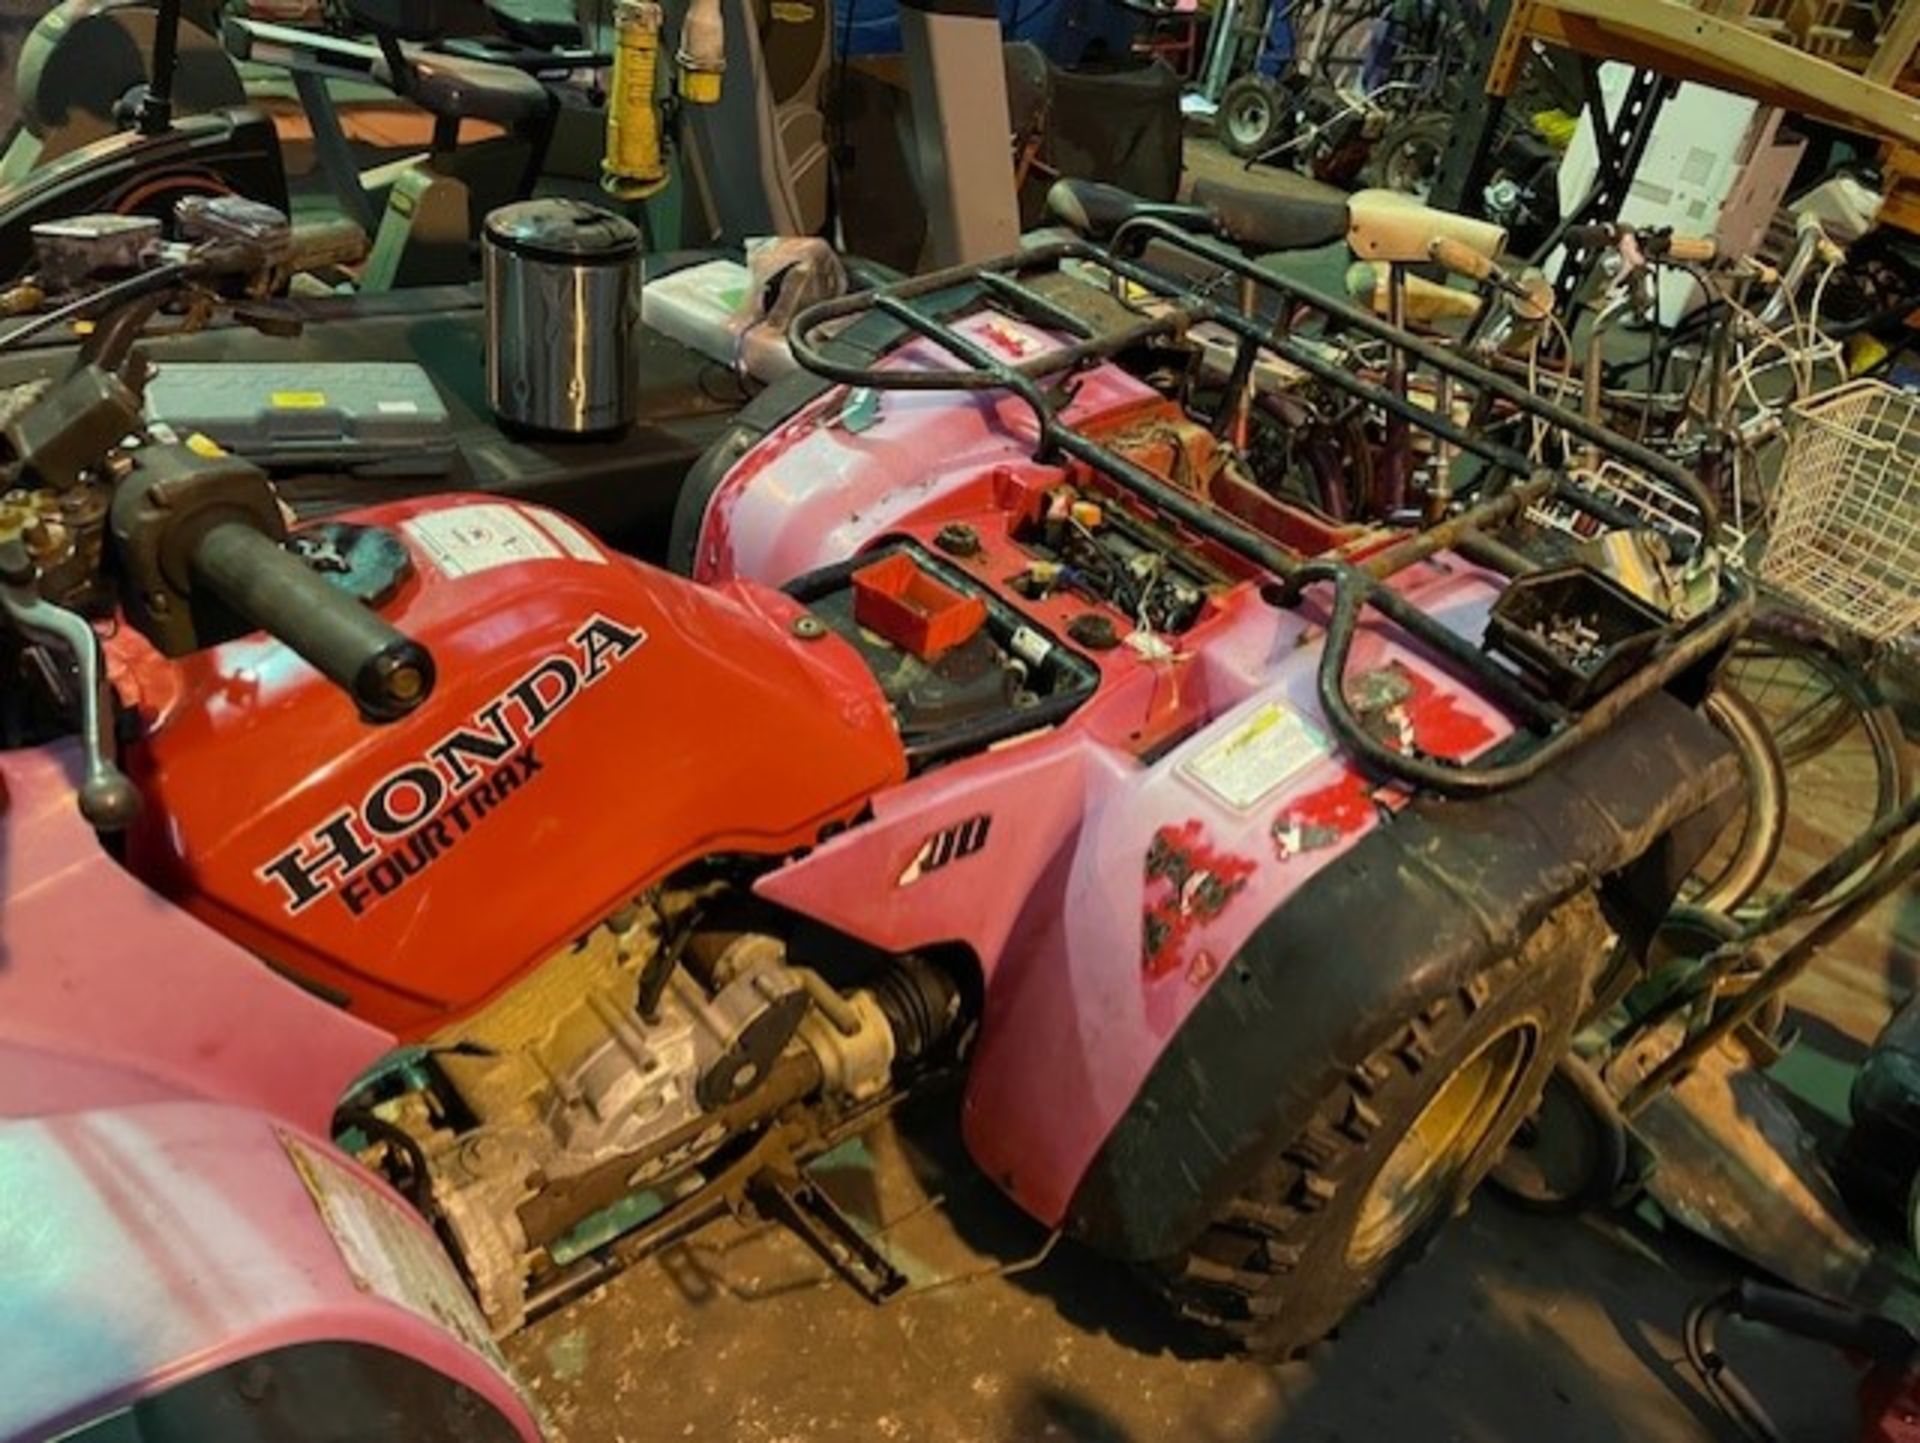 Honda fortrax quad bike late 80s non runner all together - Image 4 of 6